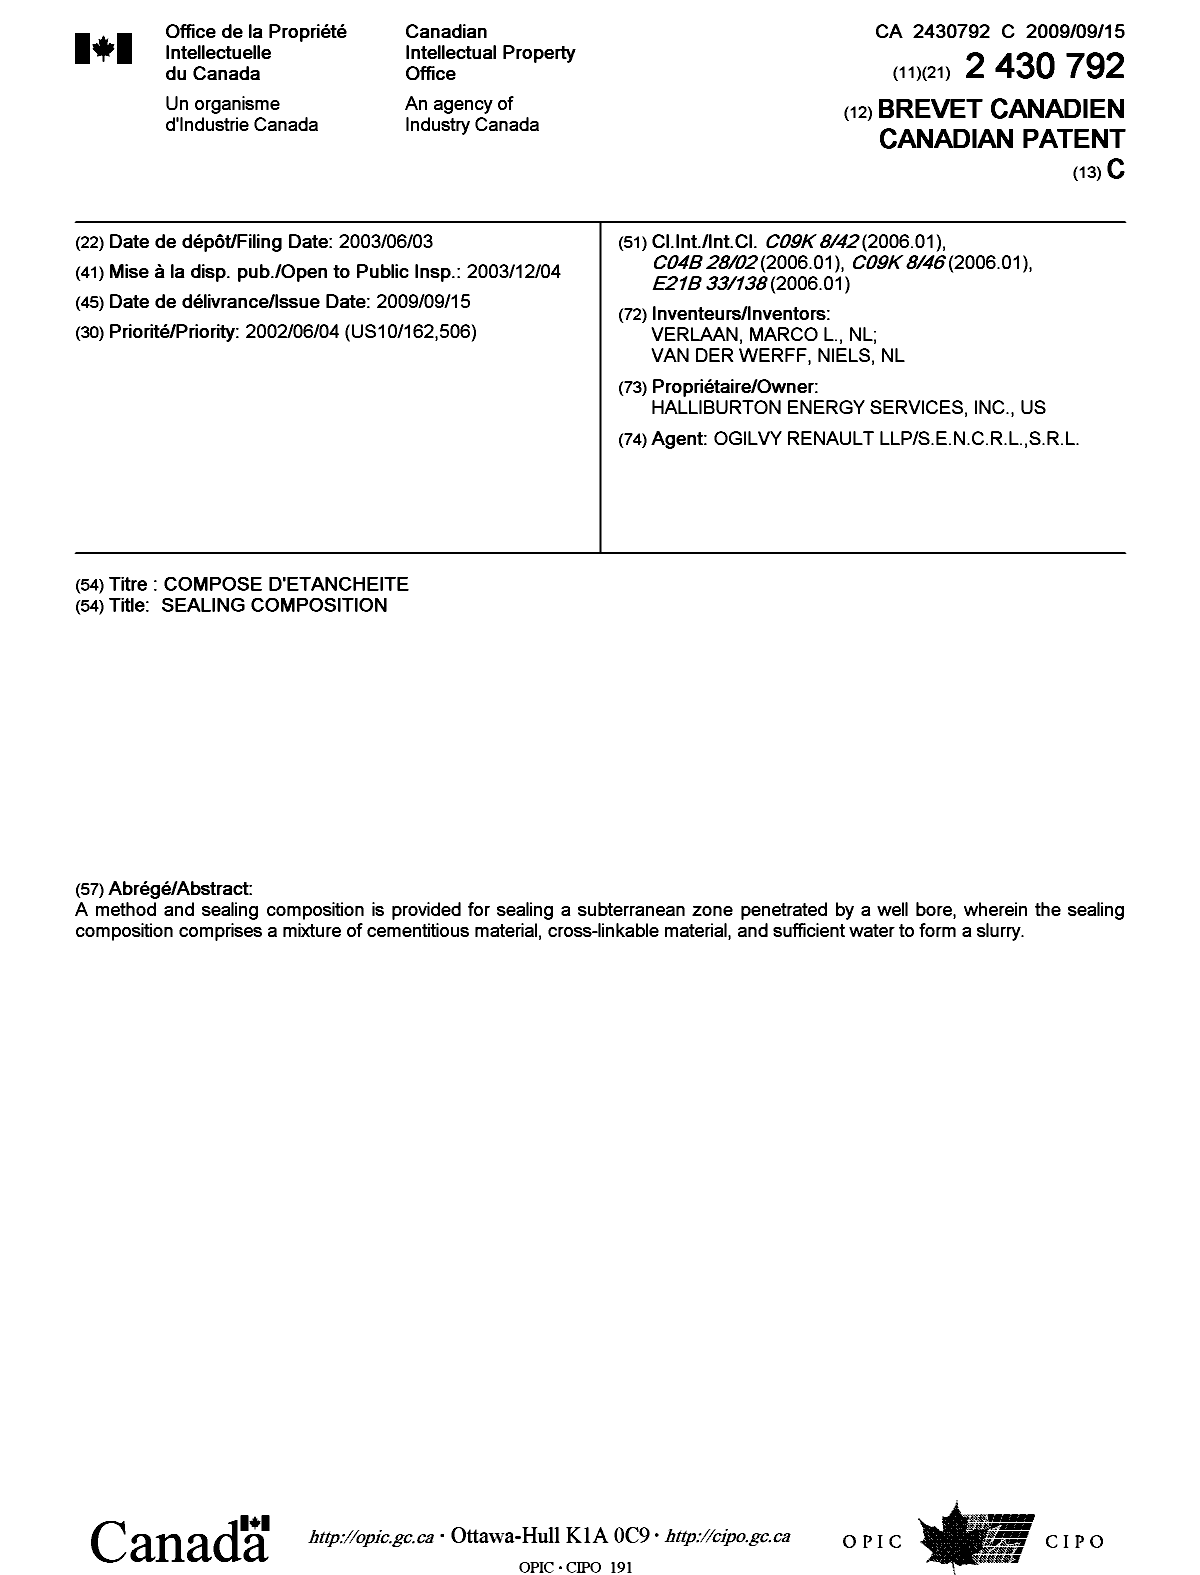 Canadian Patent Document 2430792. Cover Page 20090825. Image 1 of 1